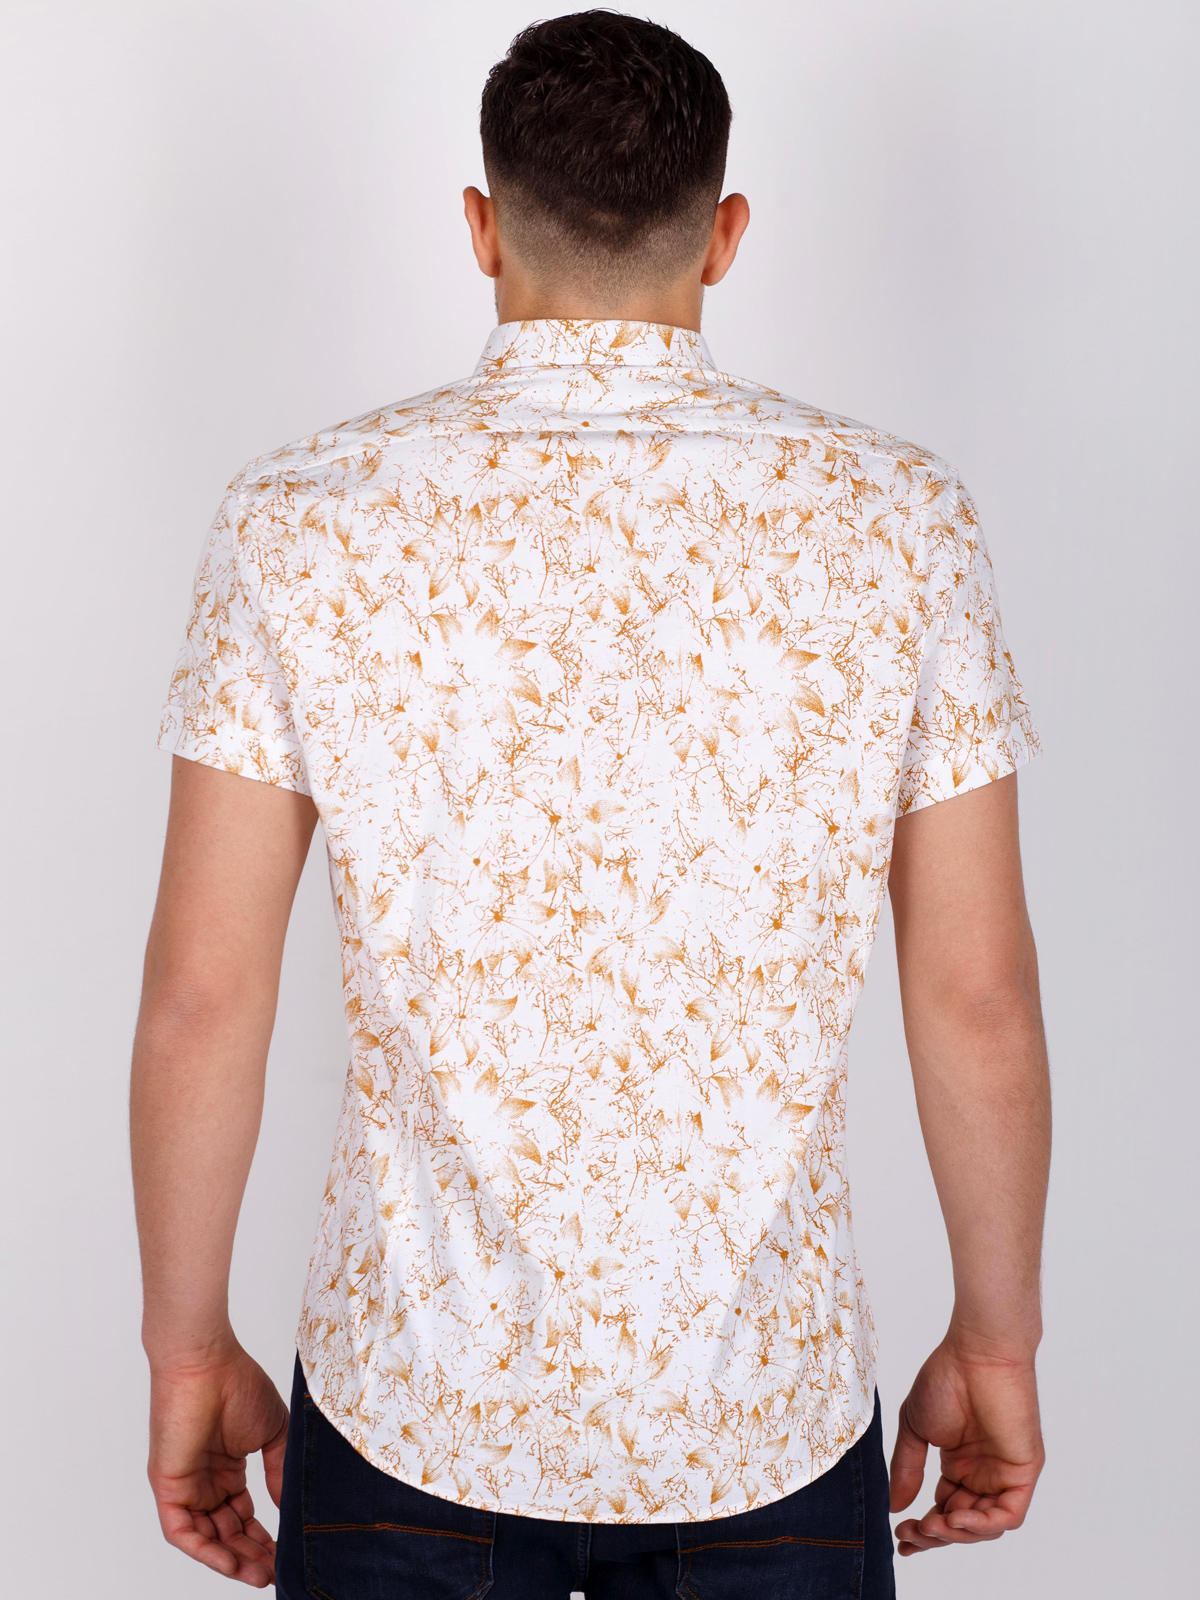 White shirt with floral print in mustard - 80219 € 16.31 img4